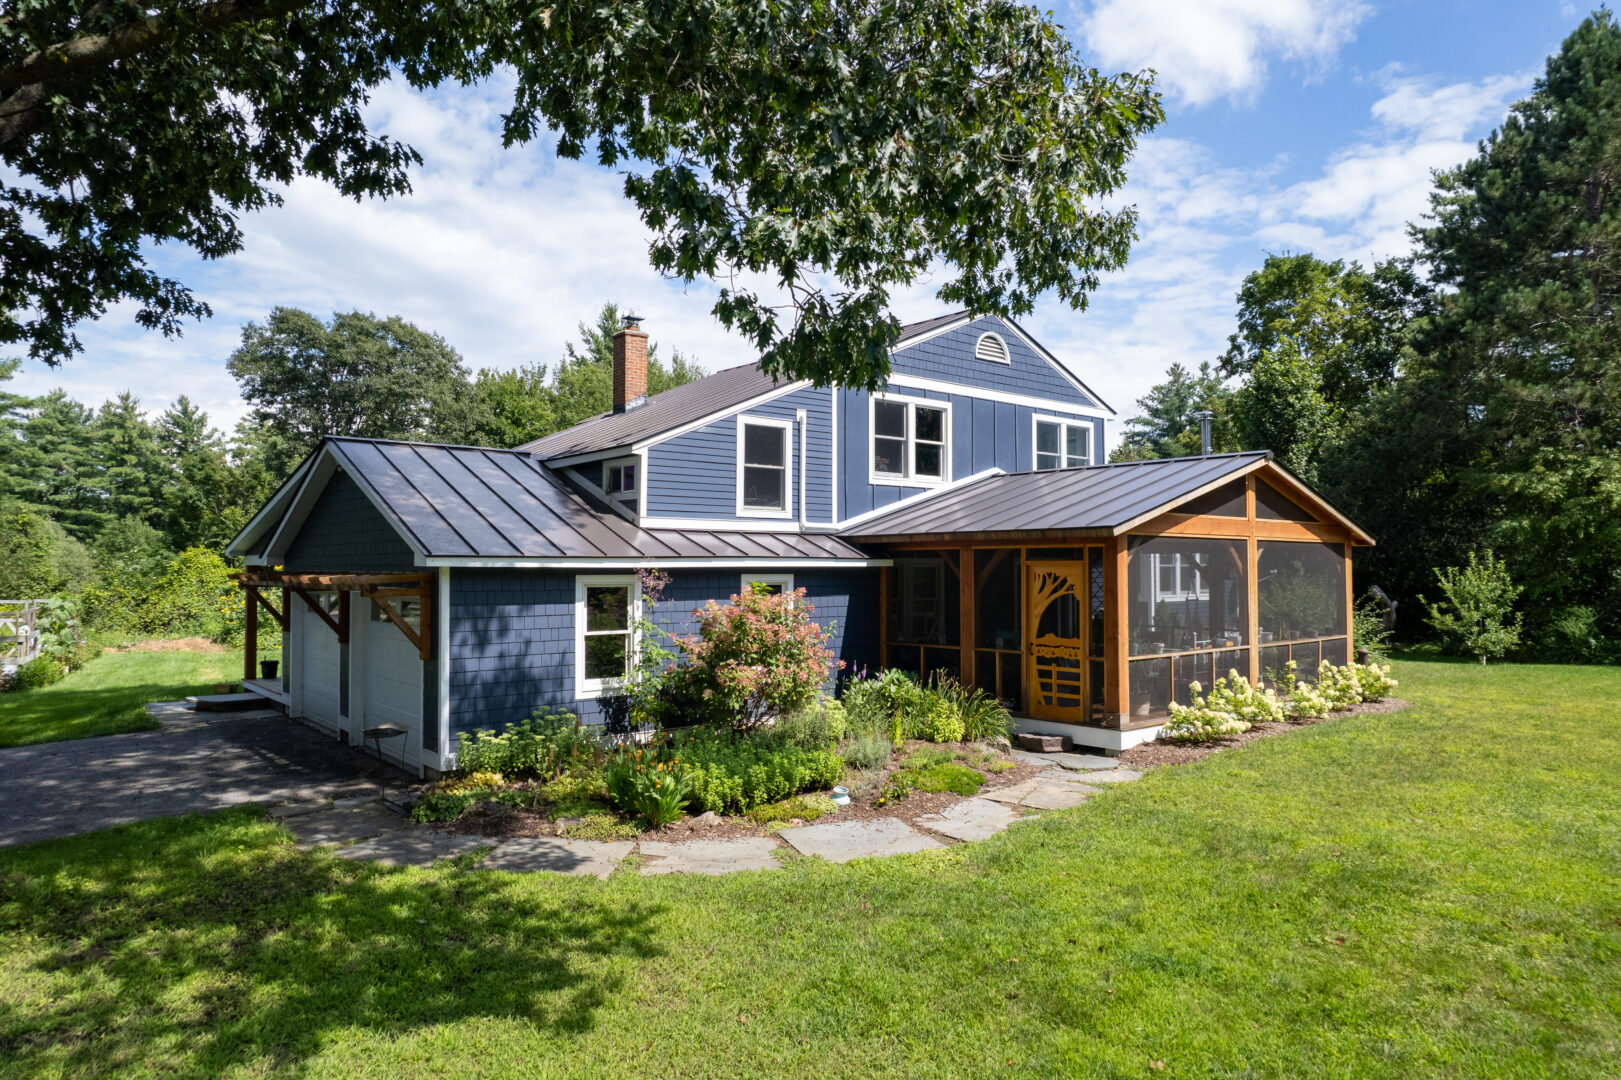 Blue house in Vermont with a stunning standing seam metal roof